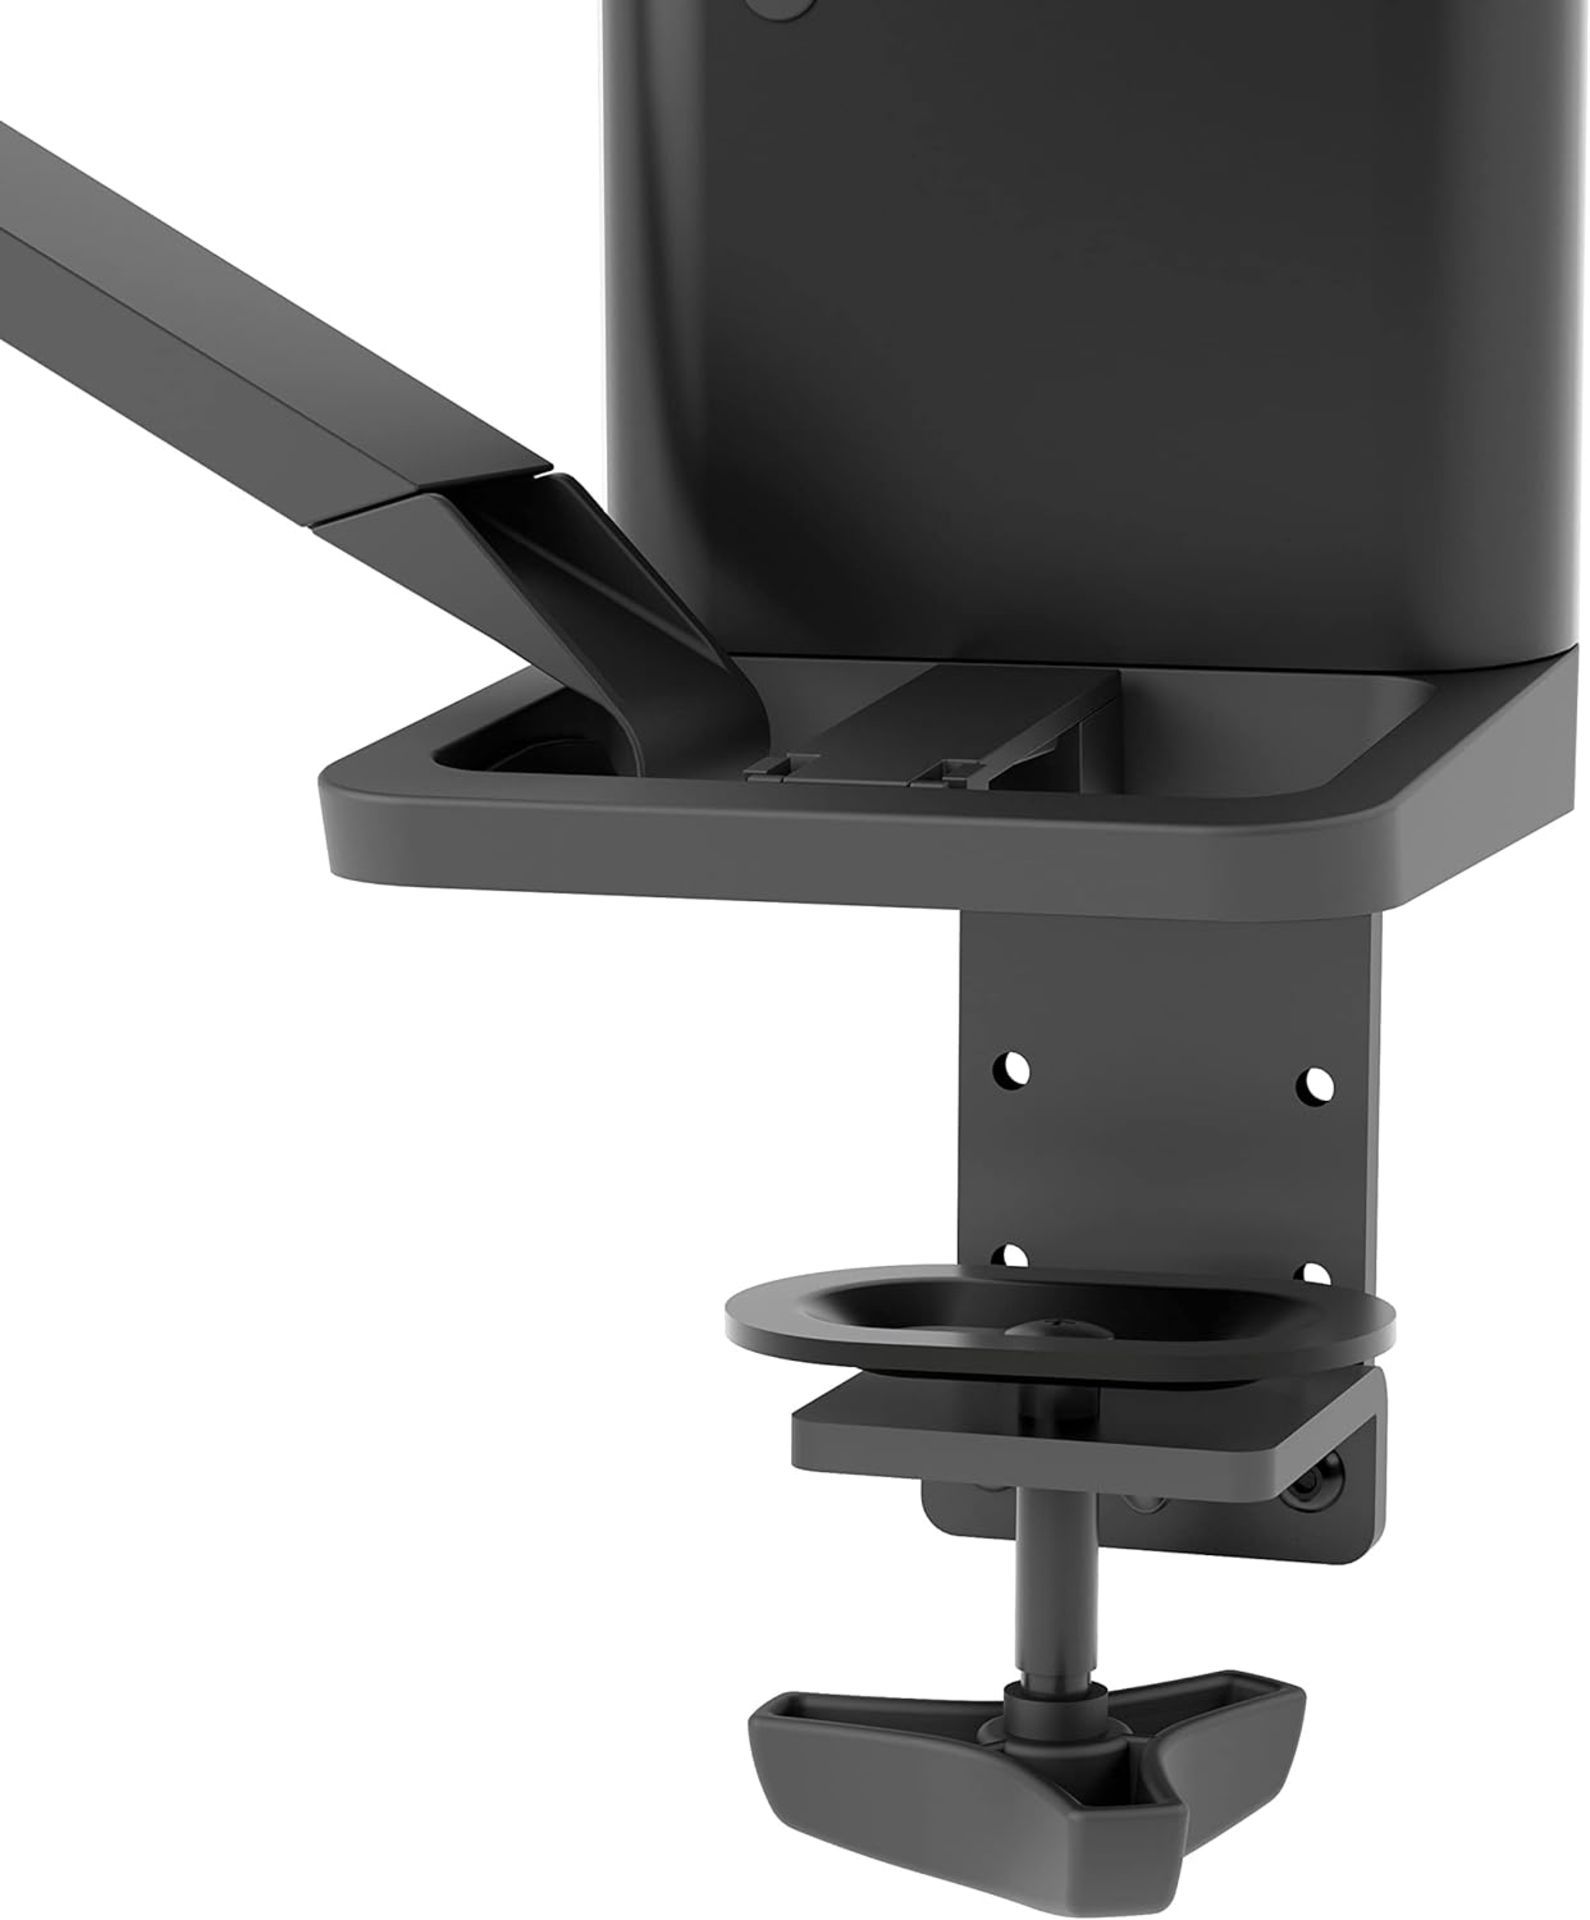 NEW & BOXED ERGOTRON Trace Dual Monitor Arm, VESA Desk Mount. RRP £417. (PCK5). for 2 Monitors Up to - Image 8 of 8